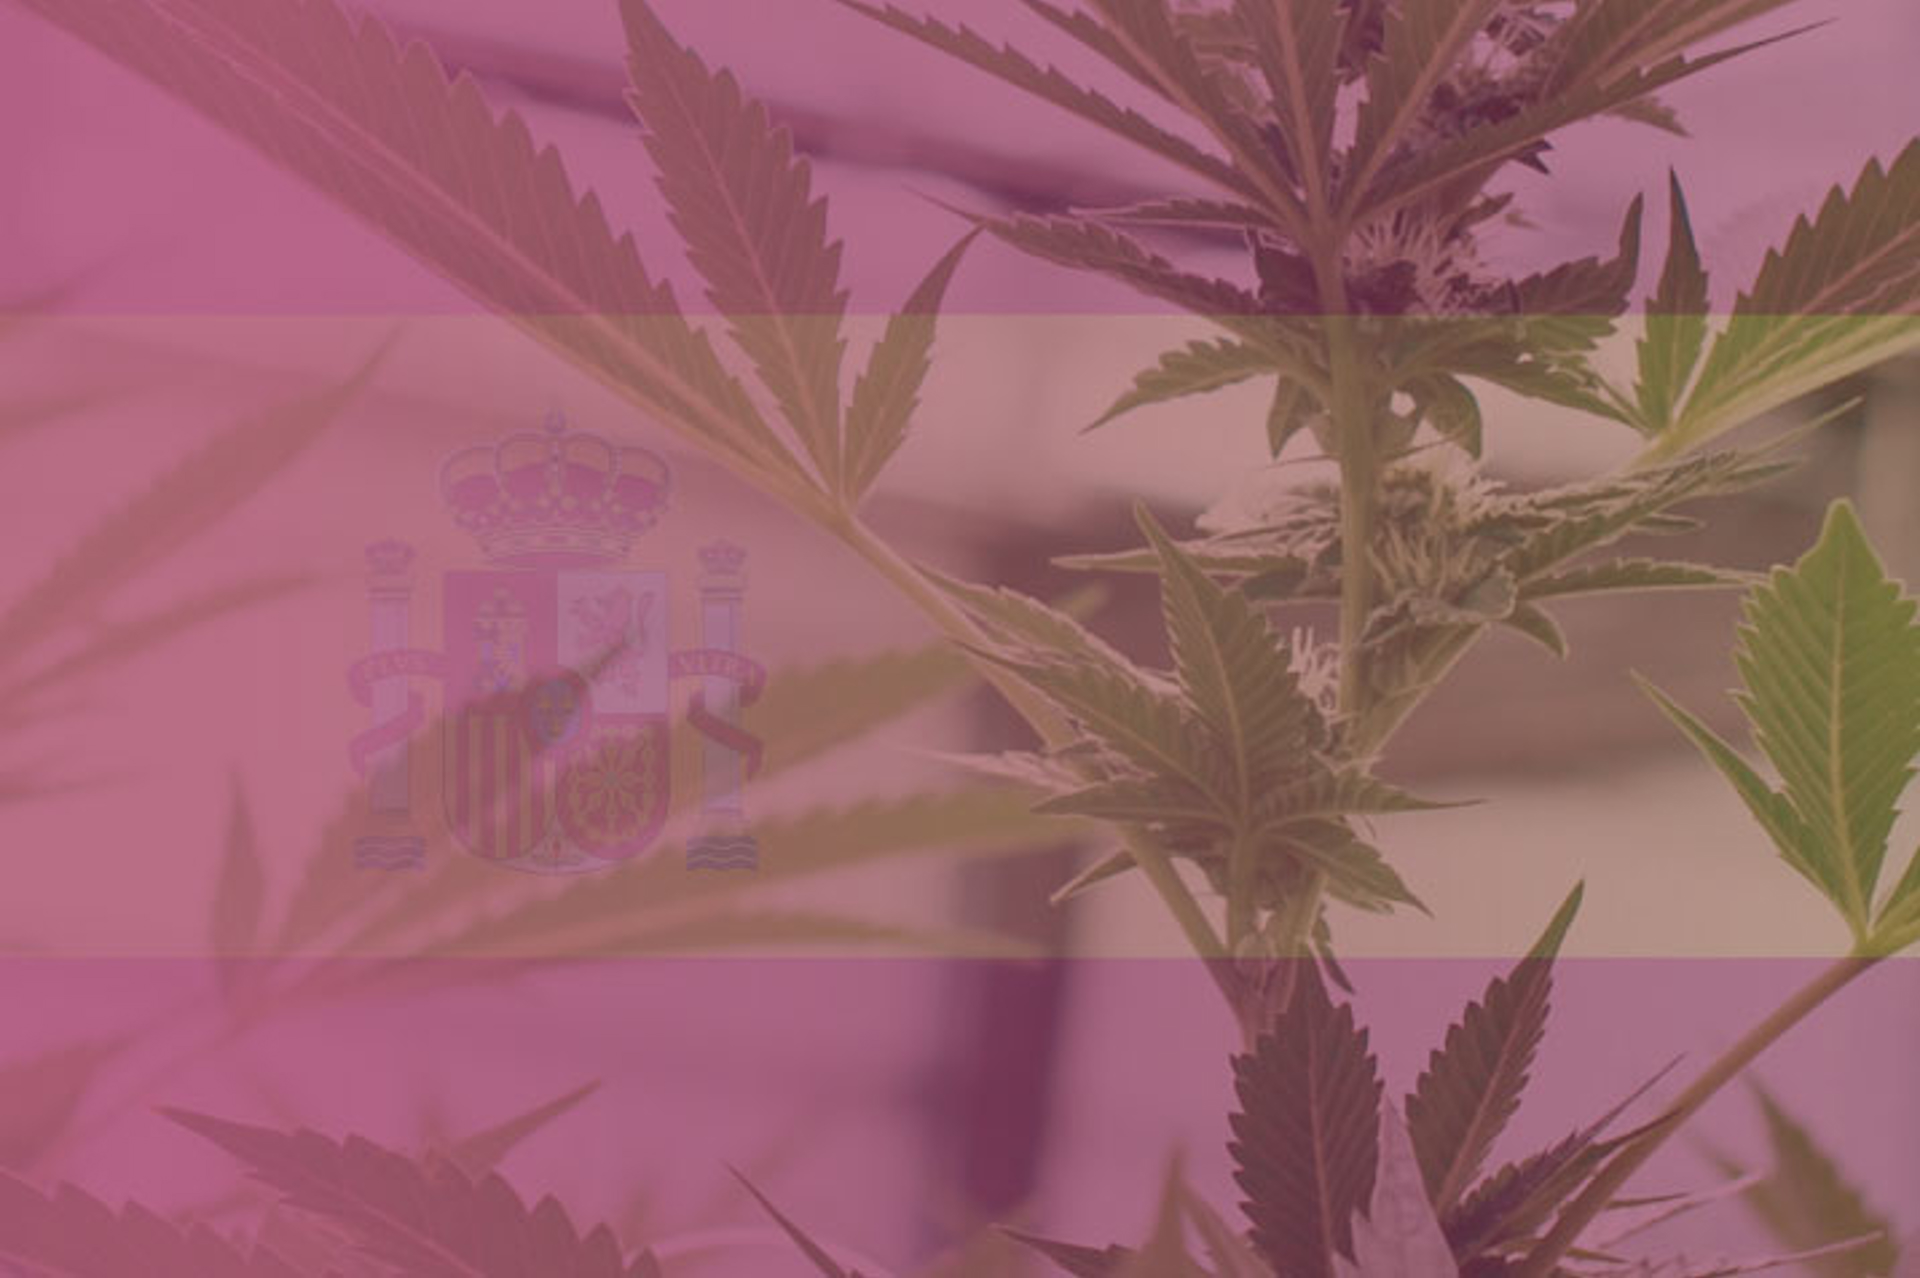 Greenhouse Cannabis Cultivation in Spain: Regulatory Landscape and Market Trends